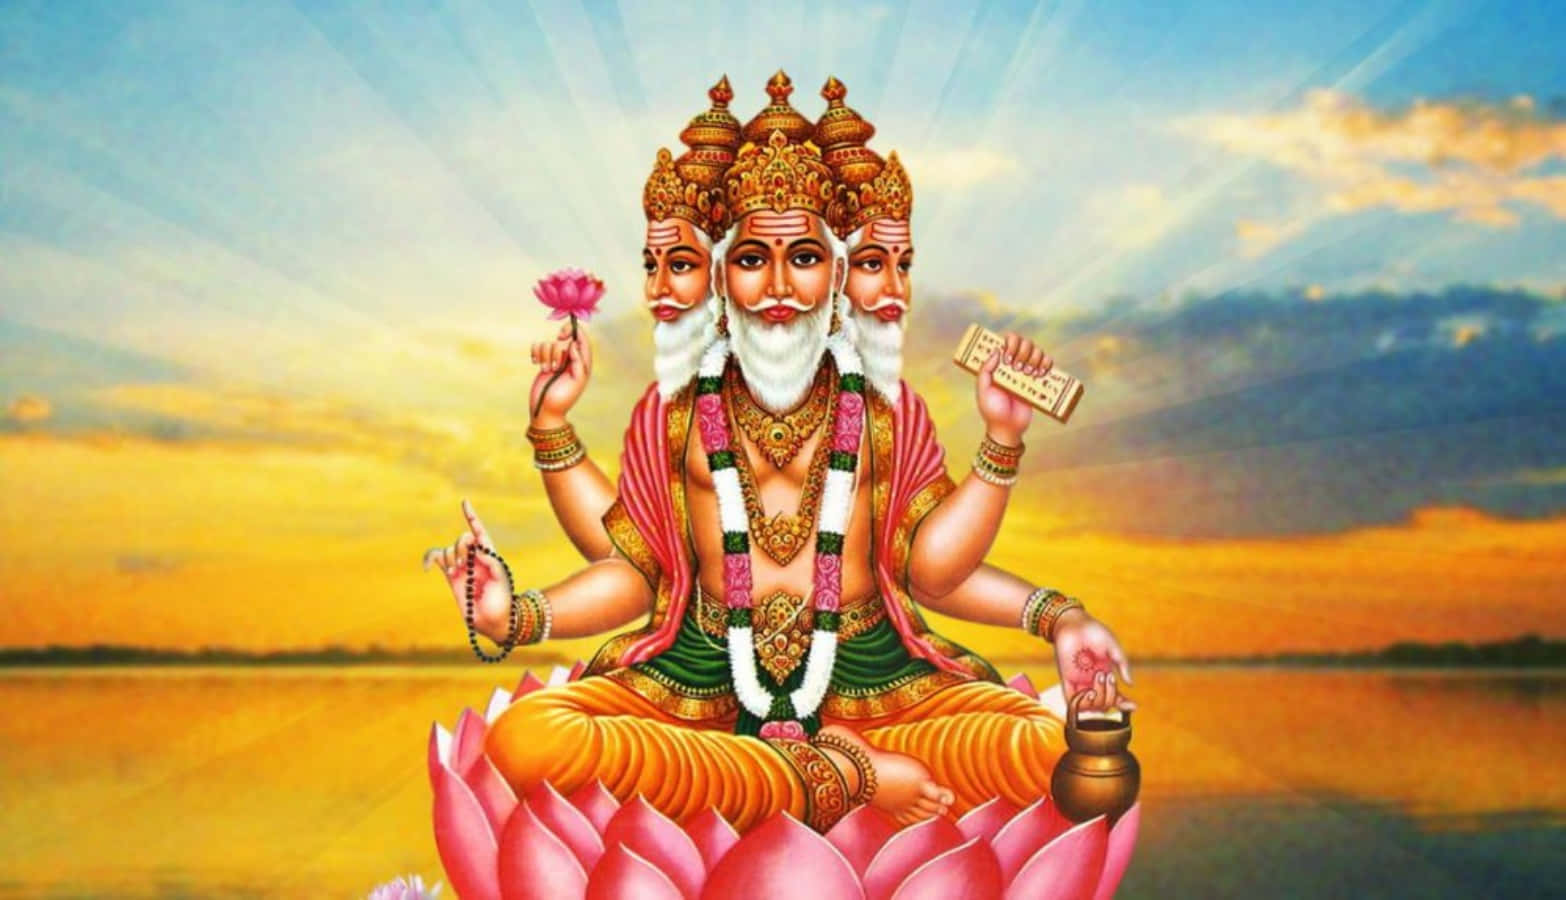 An Illustration of the Grand Indian God